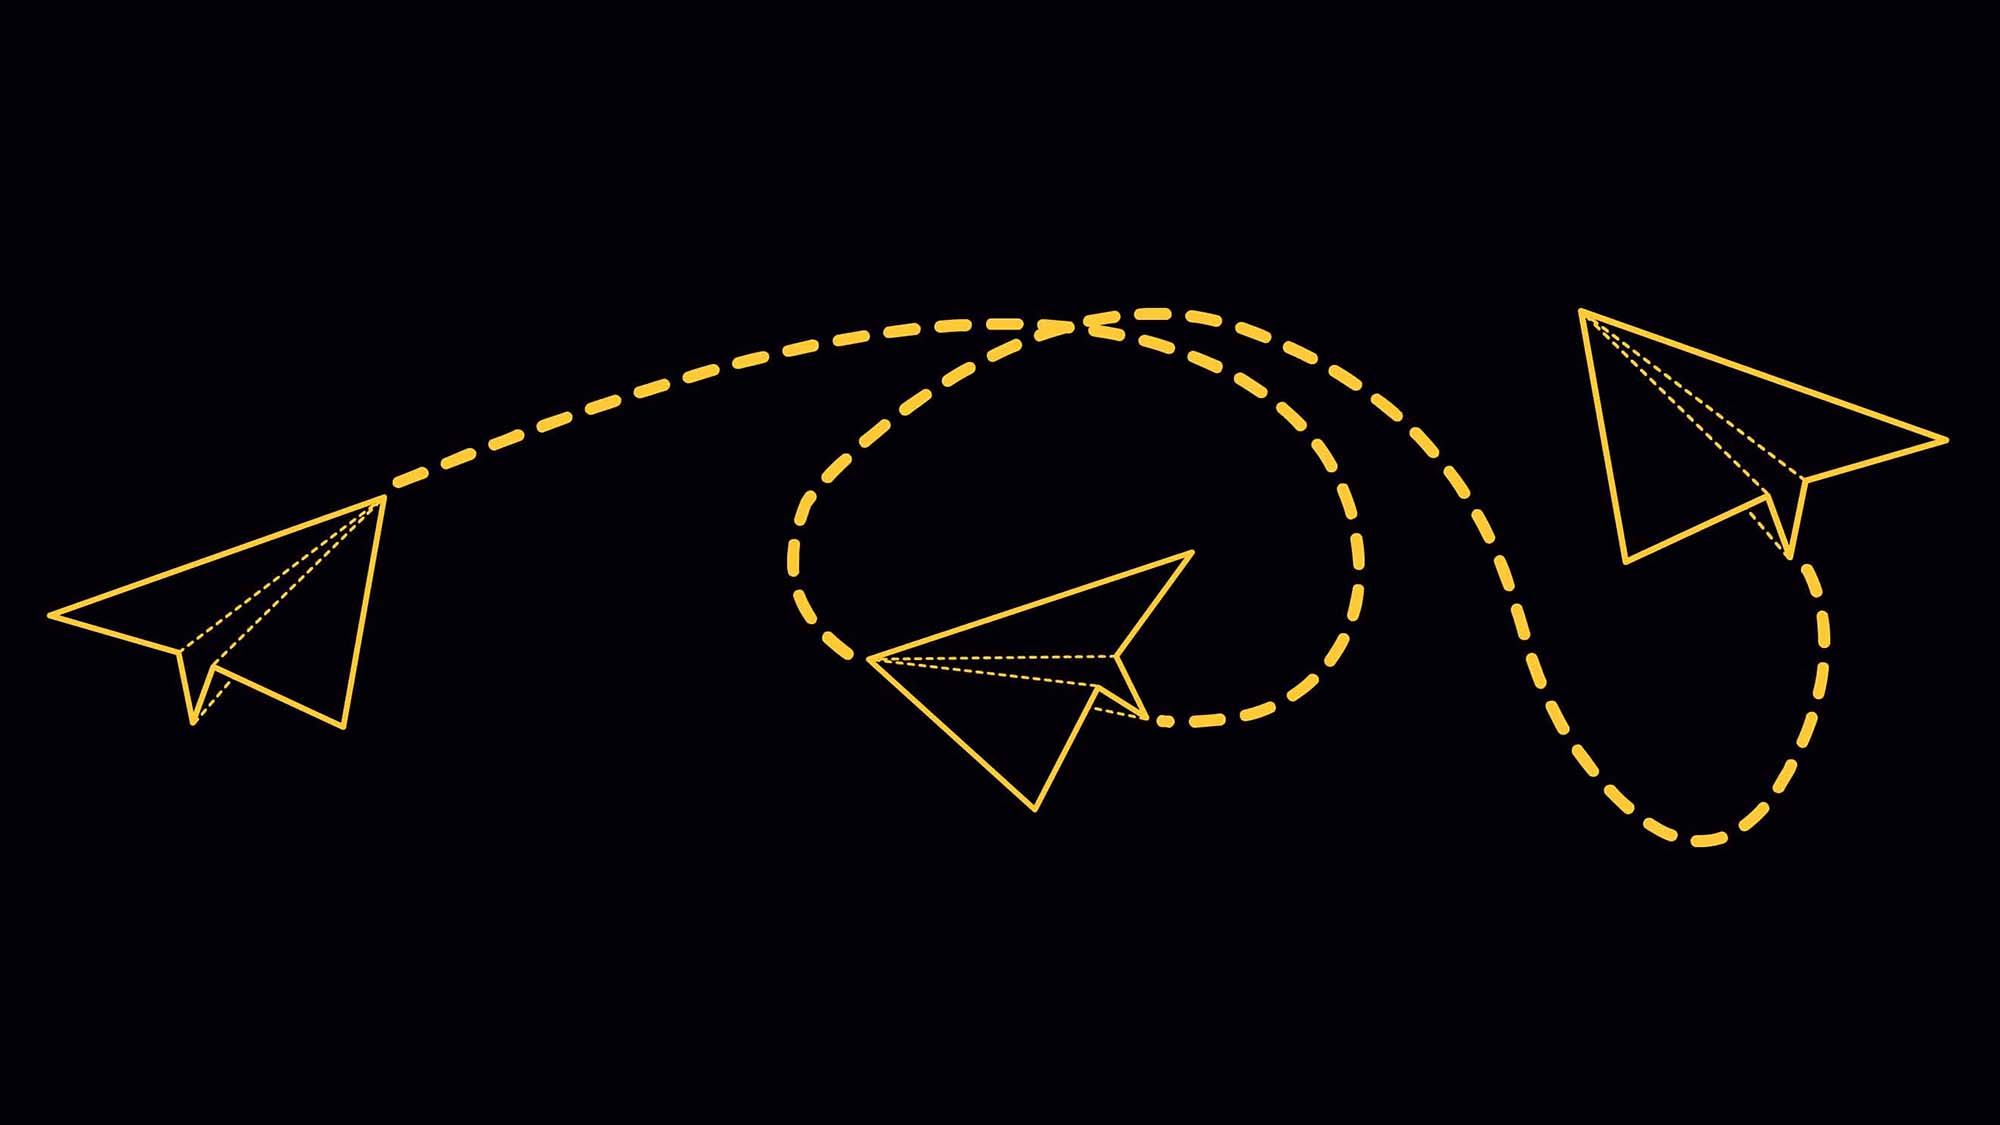 graphic of a paper airplane flying in a pattern marked by a dotted line